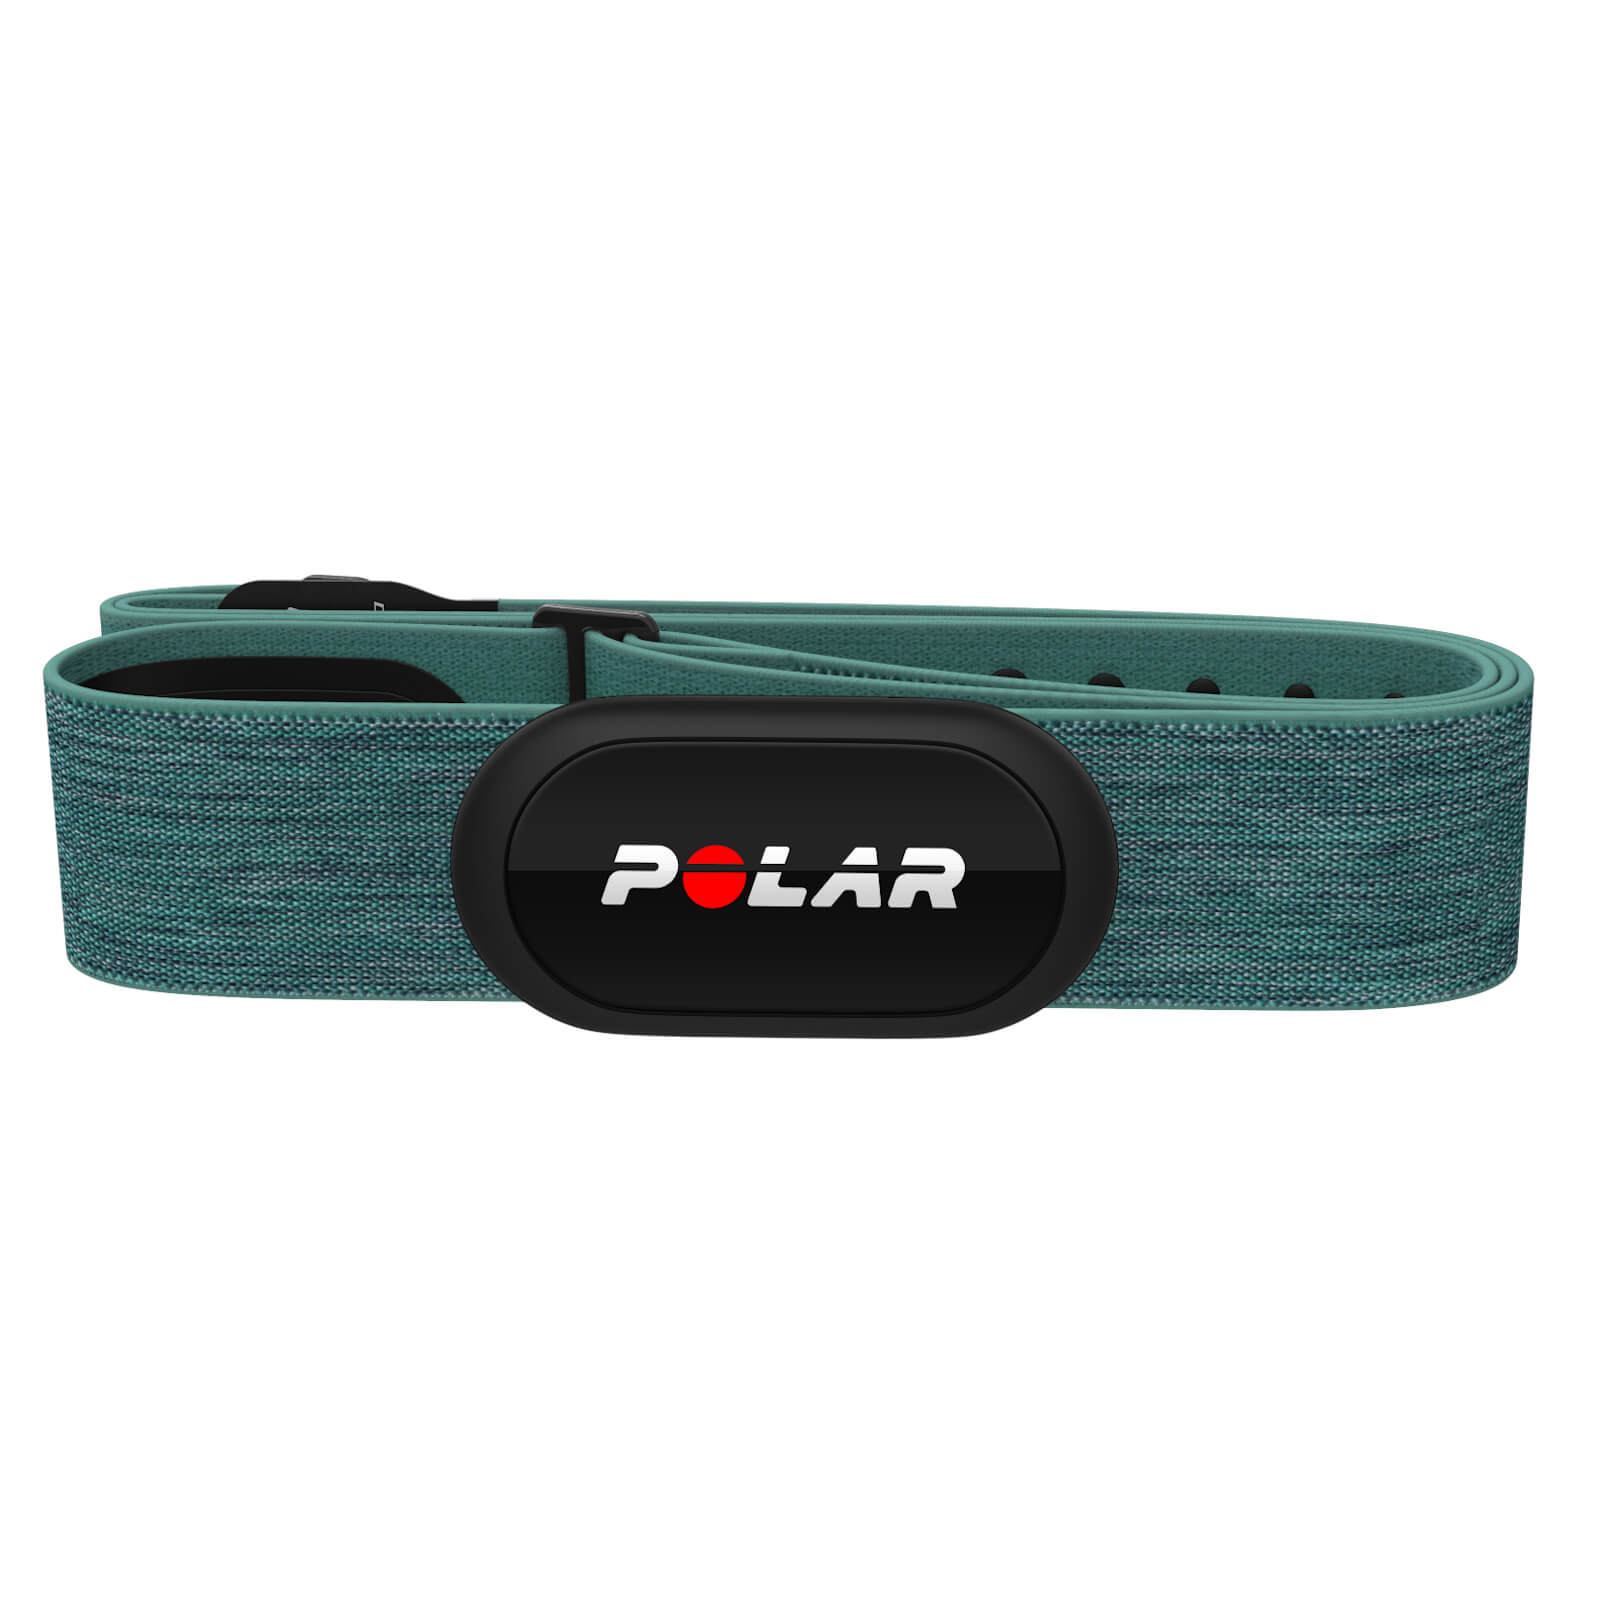 Image of Polar H10 Ant+ Heart Rate Monitor - M-XXL - Turquoise